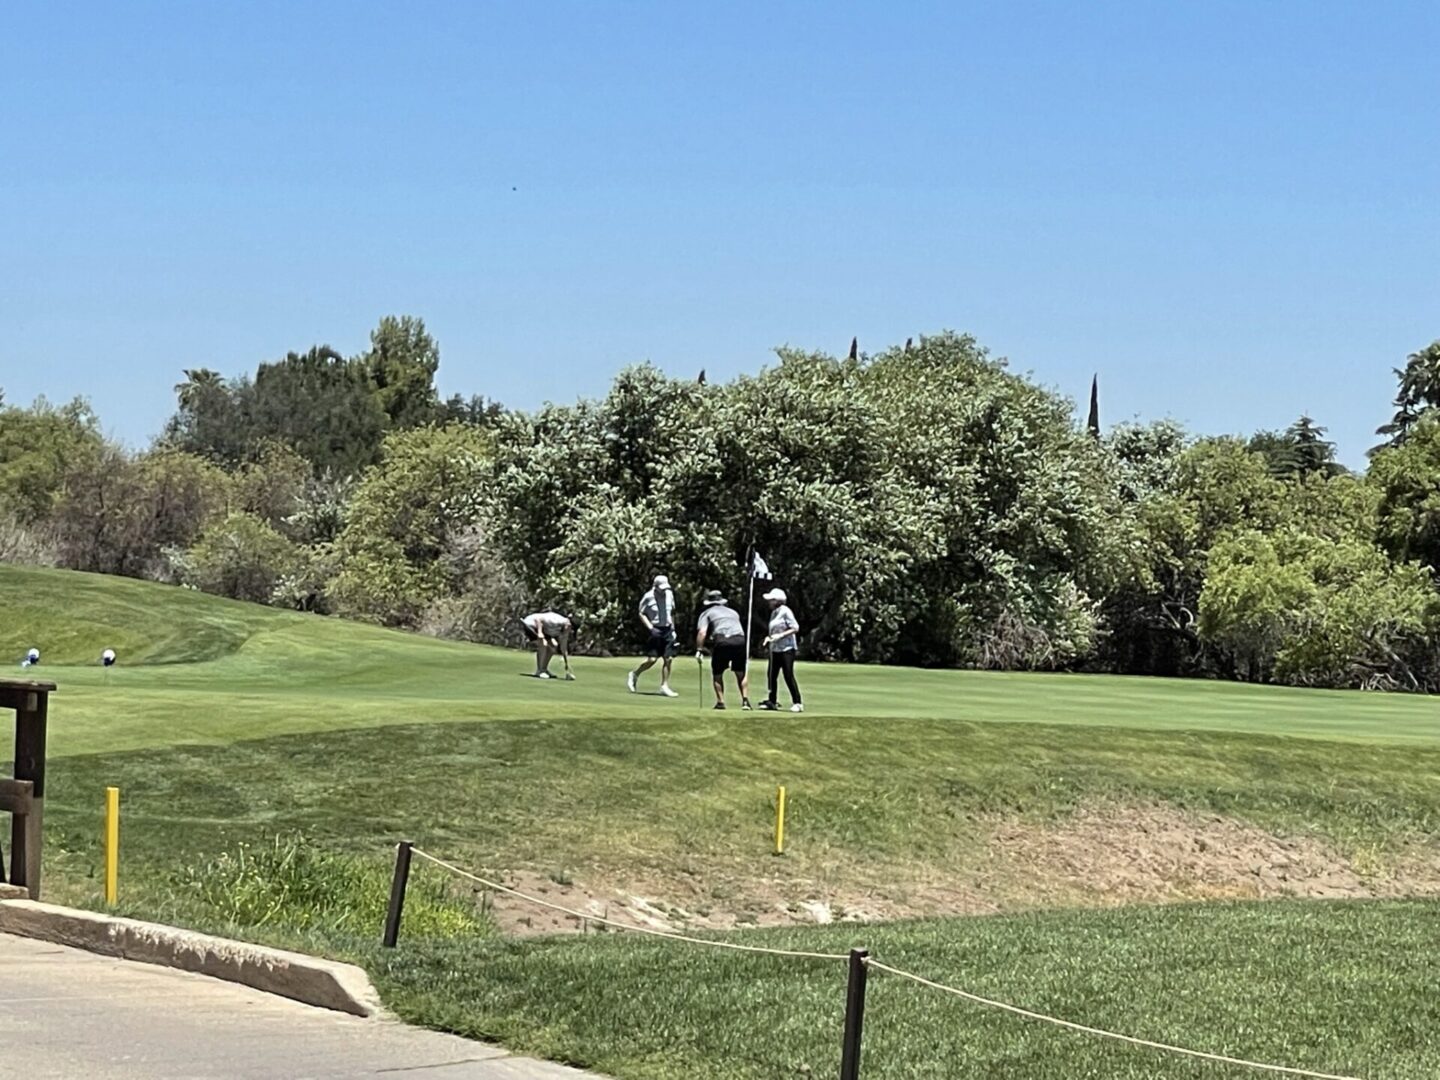 A Team of Golfers in Action on the Golf Course